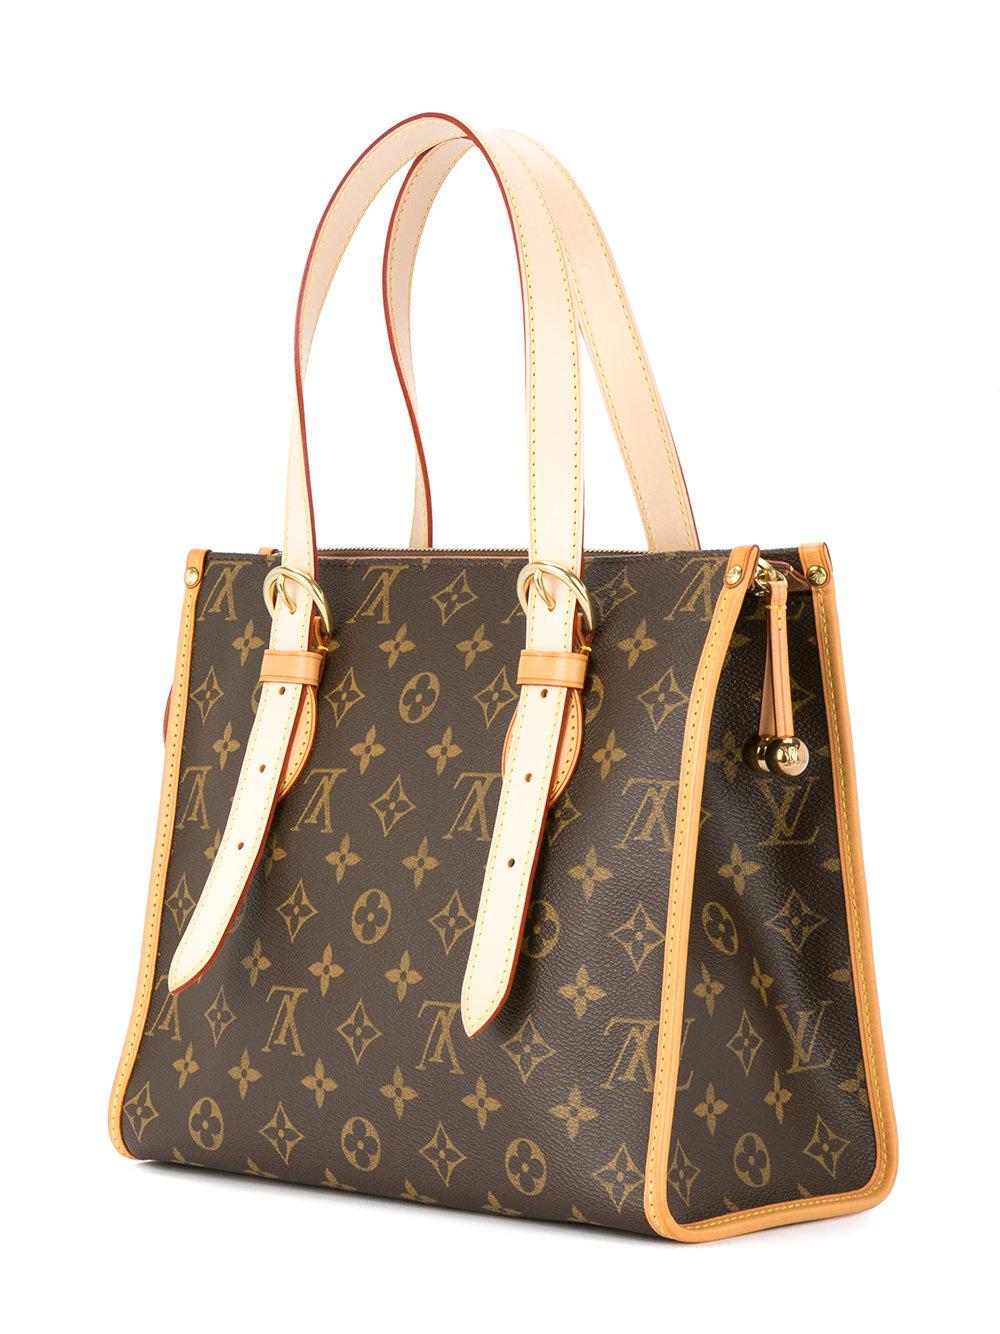 Lv Bag Made In Usable  Natural Resource Department